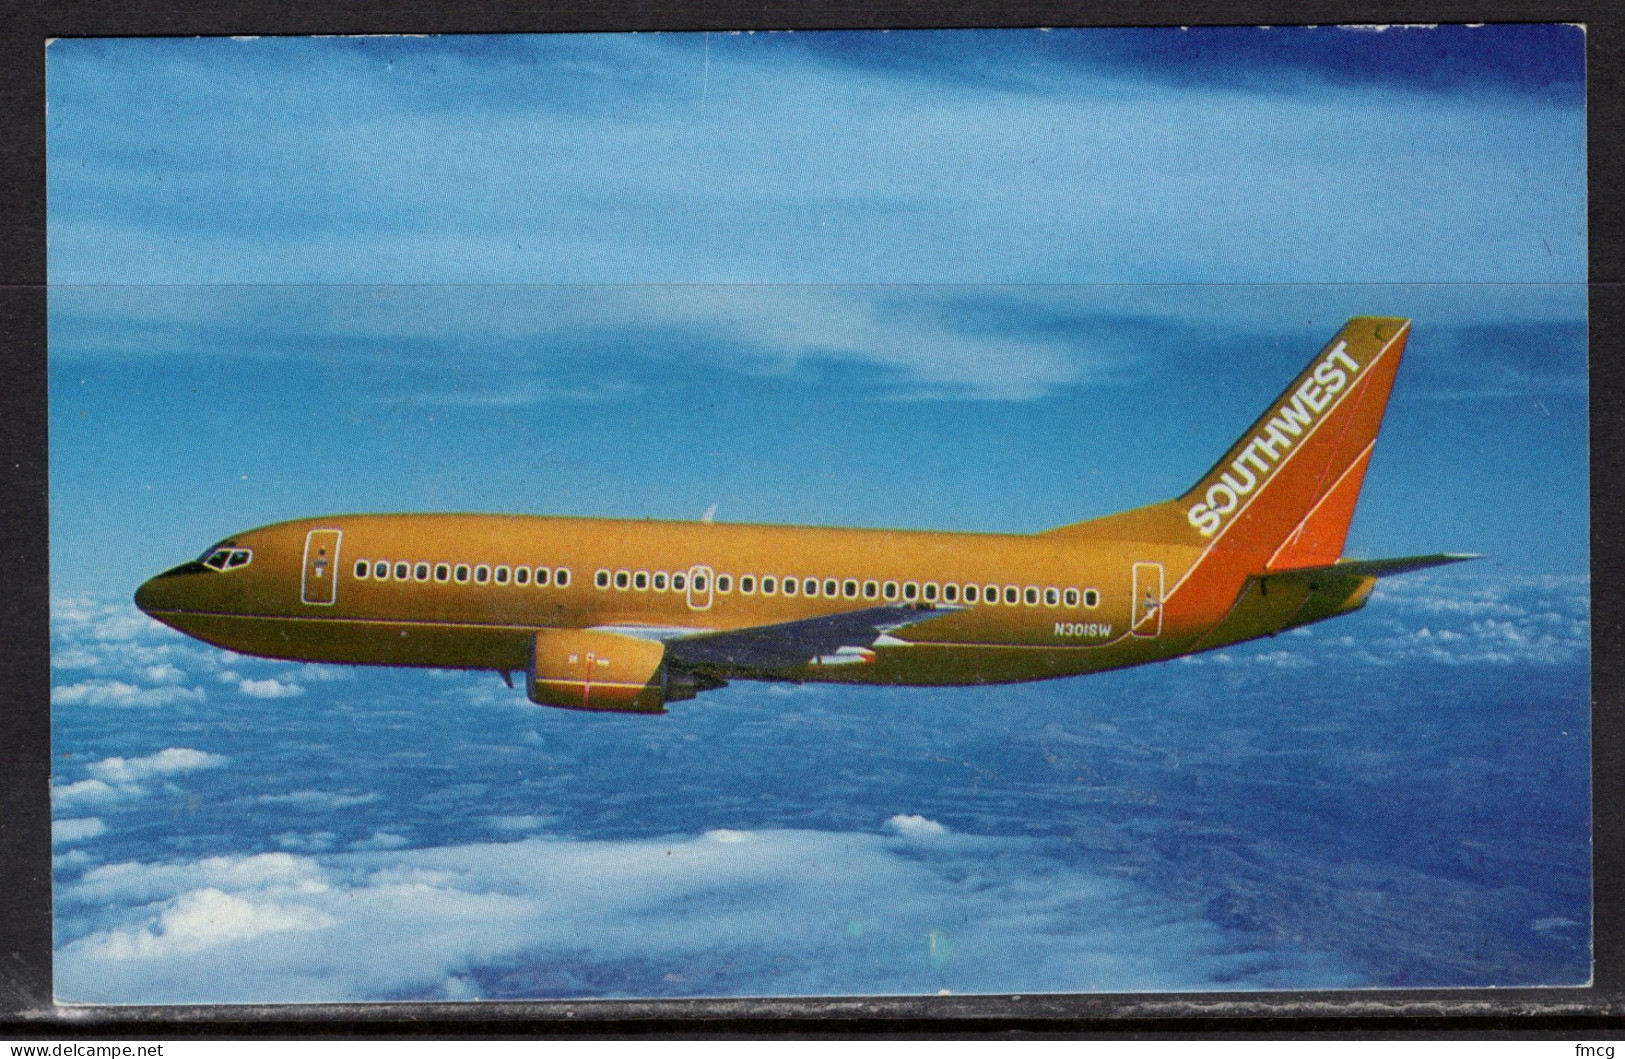 Southwest Air Lines, Boeing 727, Writing On Back - 1946-....: Moderne